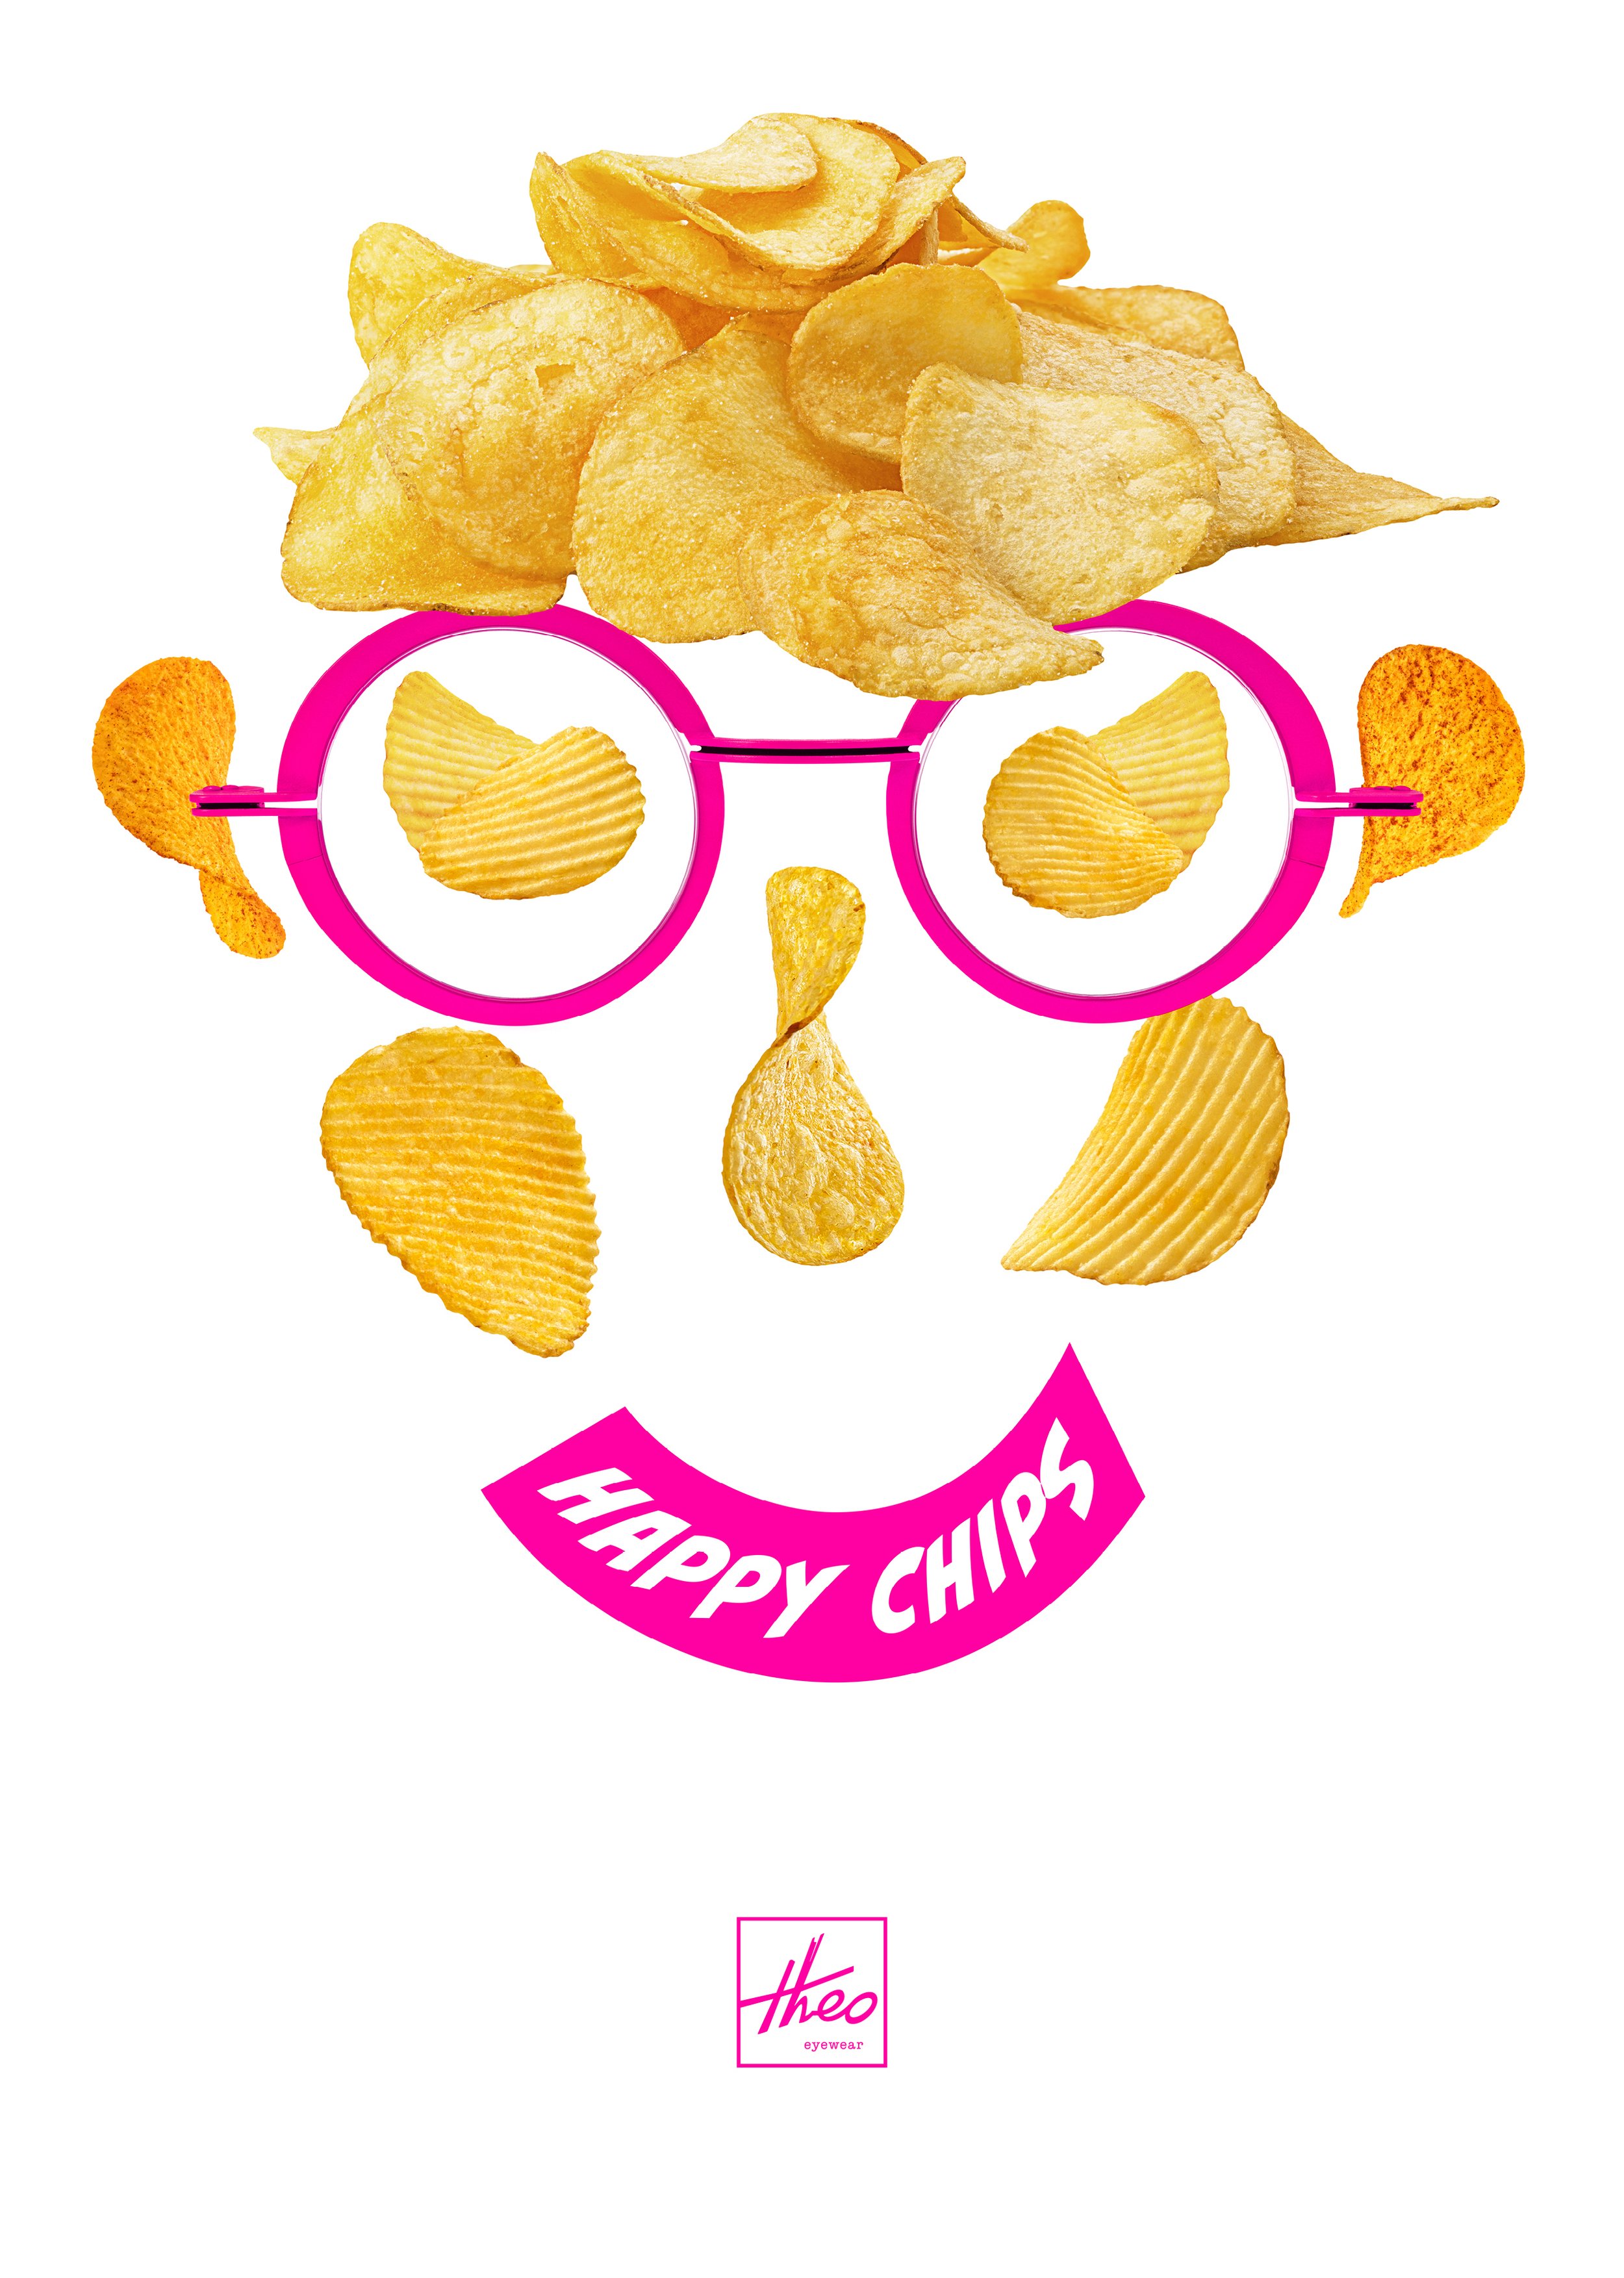 Happy chips_A4-13.jpg